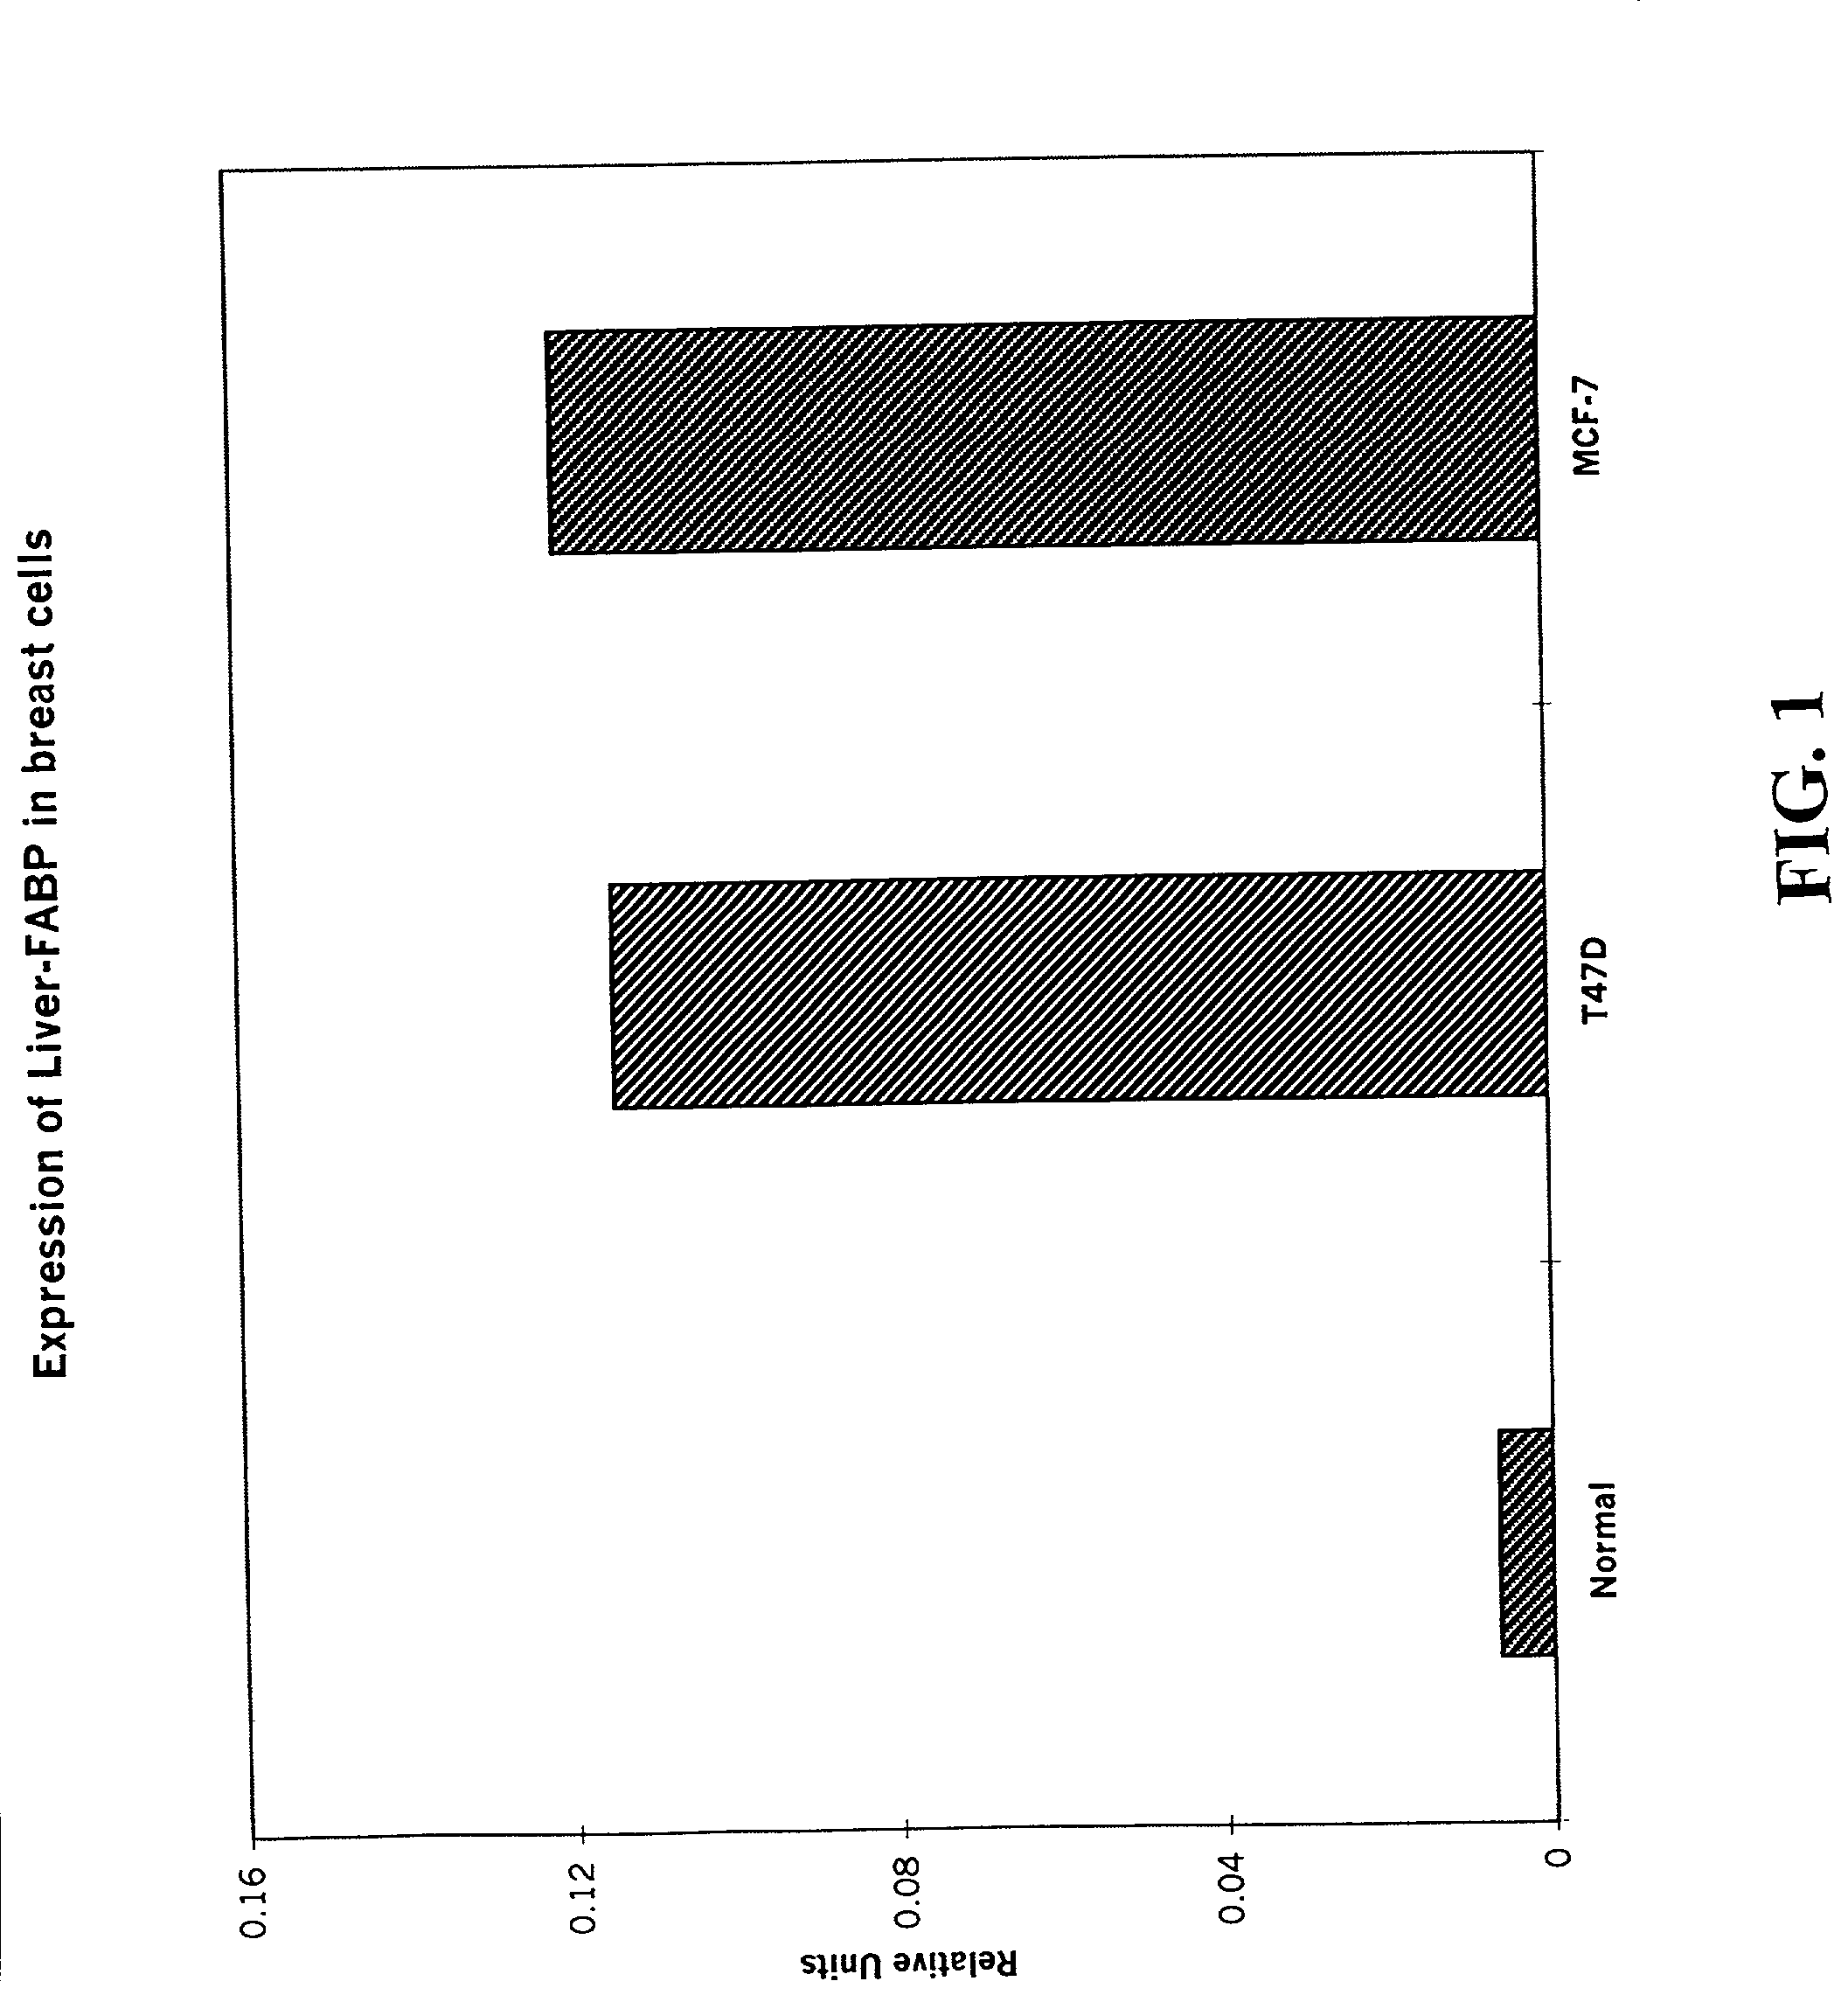 Method of diagnosing stage or aggressiveness of breast and prostate cancer based on levels of fatty acid binding proteins